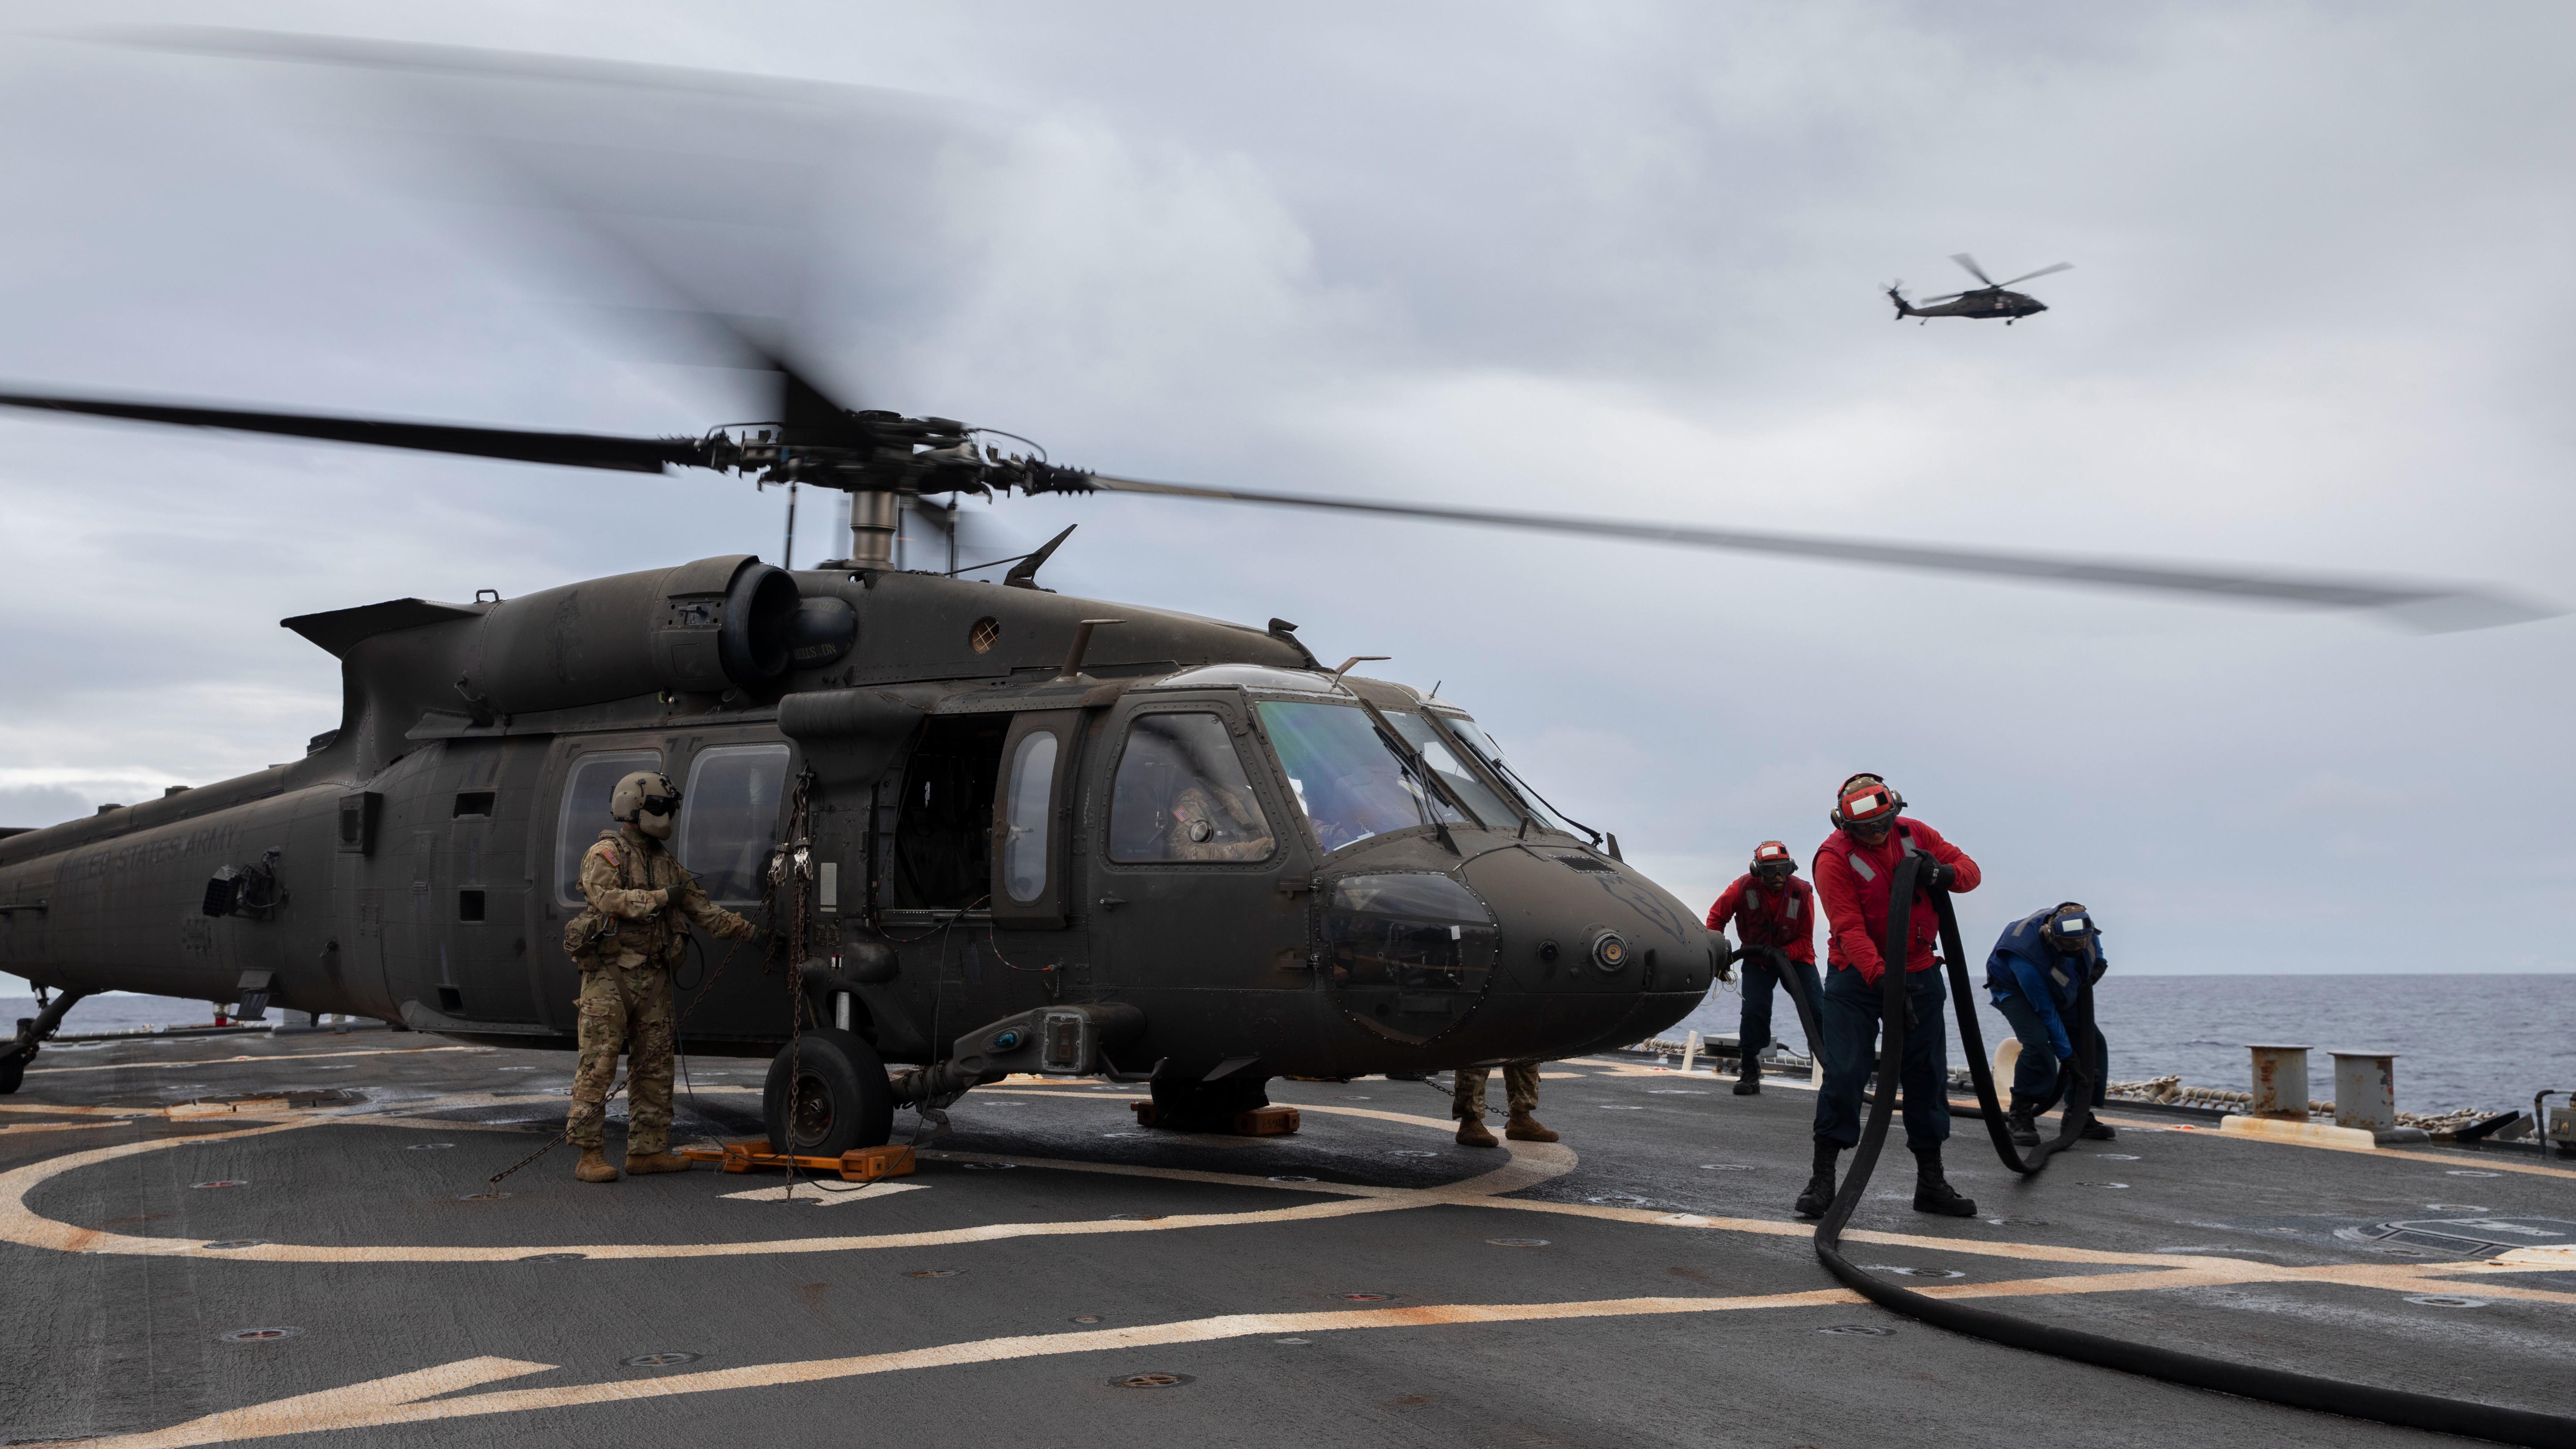 A U.S. Navy crew of boatswain mates work together to refuel a U.S. Army UH-60 Blackhawk helicopter during deck landing qualifications aboard USS John Paul Jones, off the coast of Oahu, Hawaii, November 15, 2021. Deck landing qualifications are conducted annually to maintain proficiency, allowing continued joint operations and training throughout the Indo-Pacific. (U.S. Army photo by Spc. Matthew Mackintosh, 28th Public Affairs Detachment)